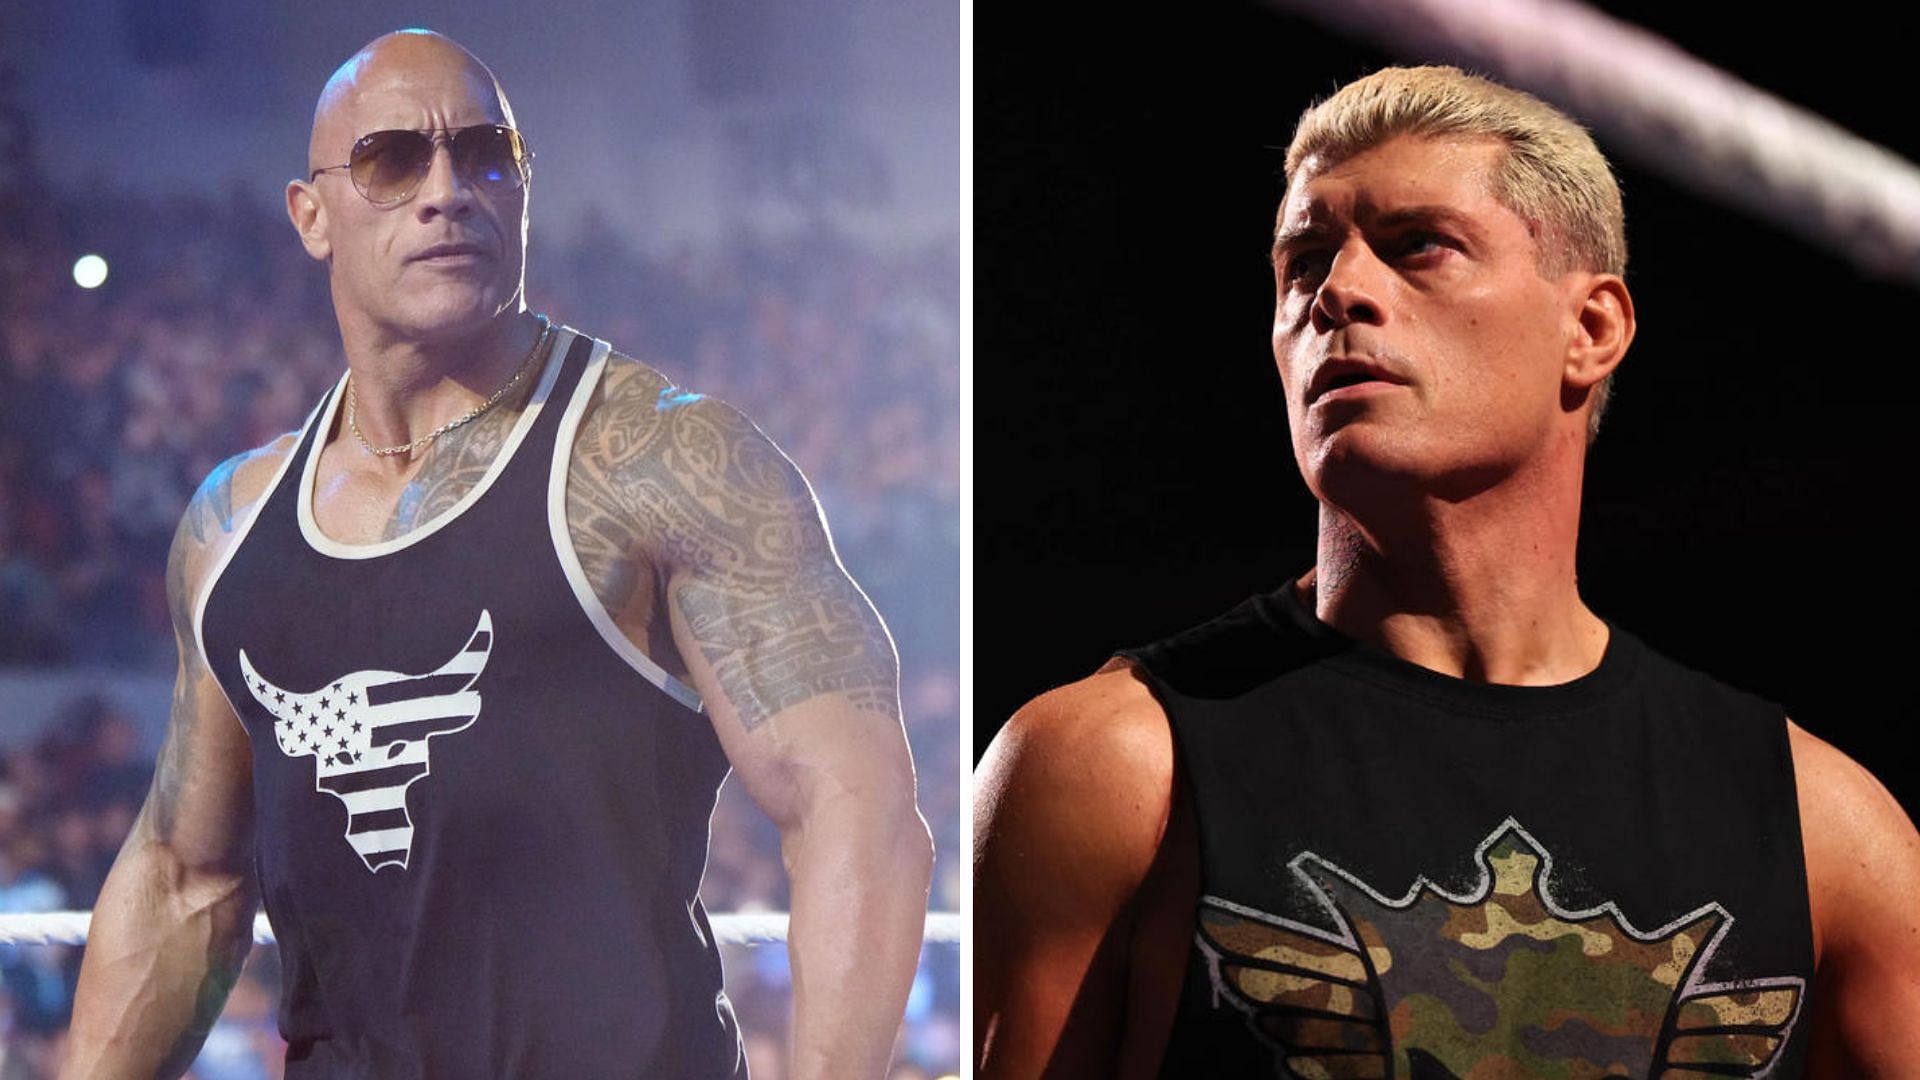 The Rock on the left and Cody Rhodes on the right [Image credits: WWE.com]